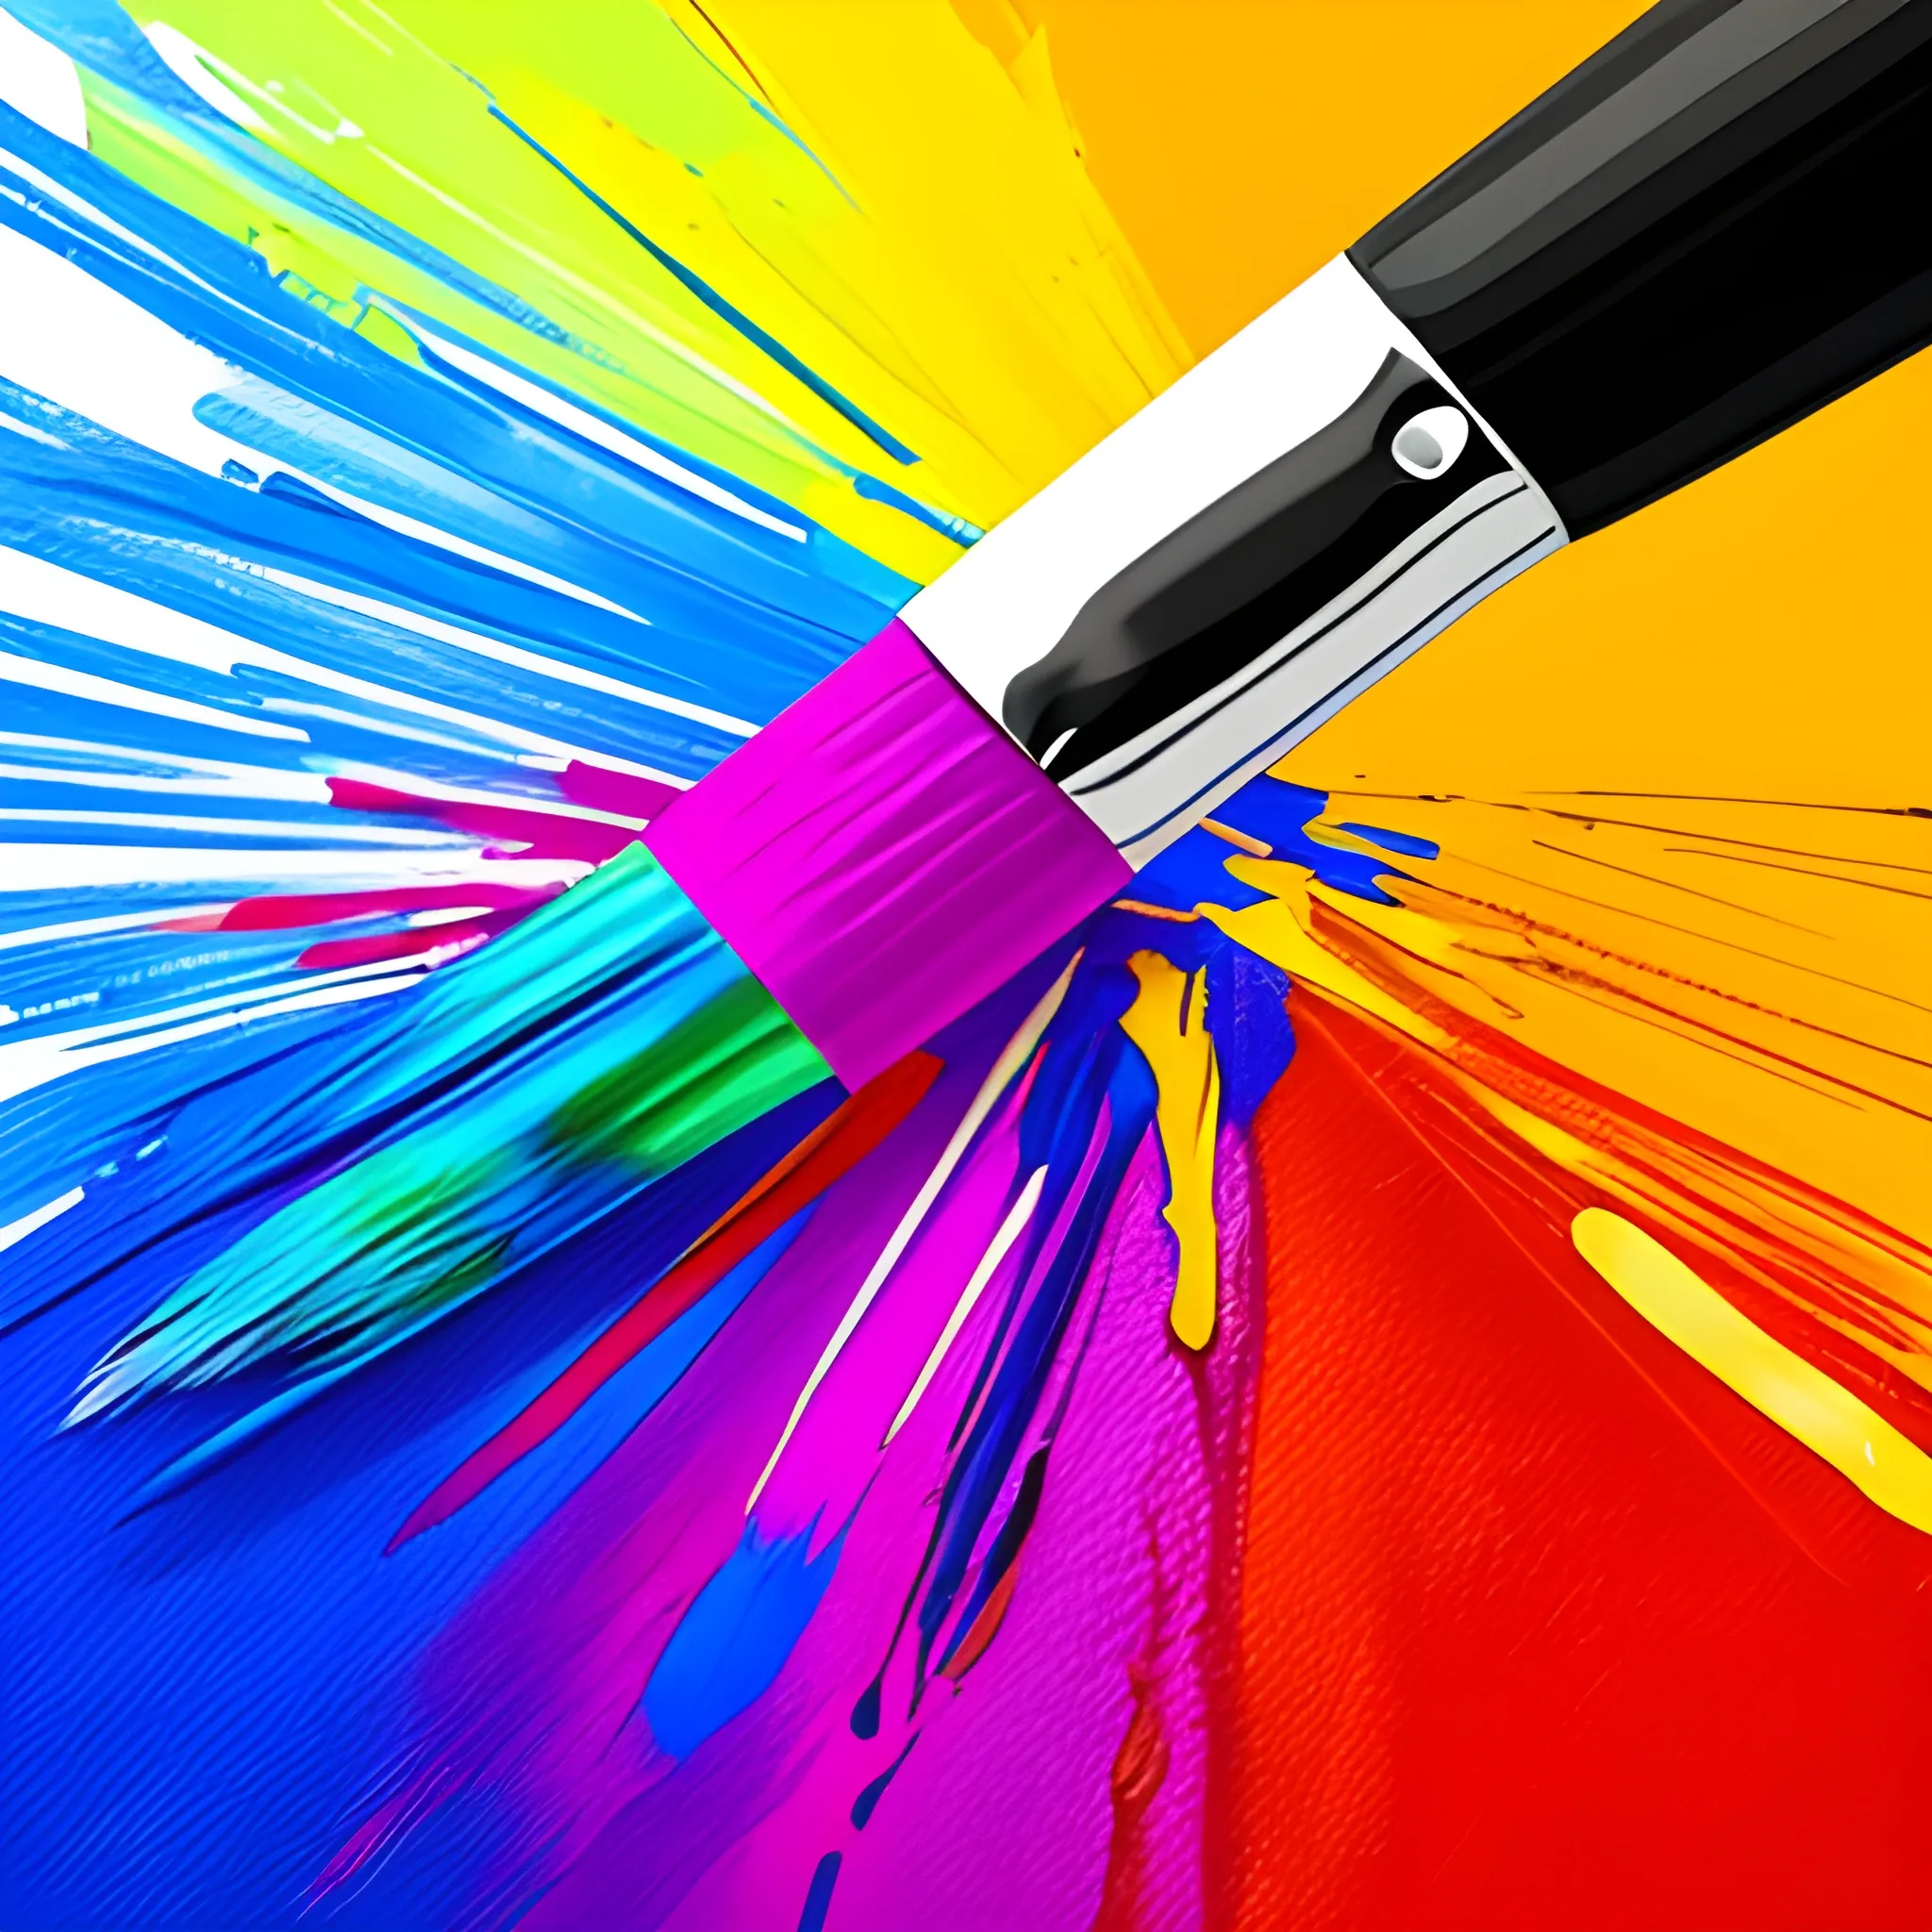 A paintbrush dipped in vibrant colors, painting a website layout on a canvas.